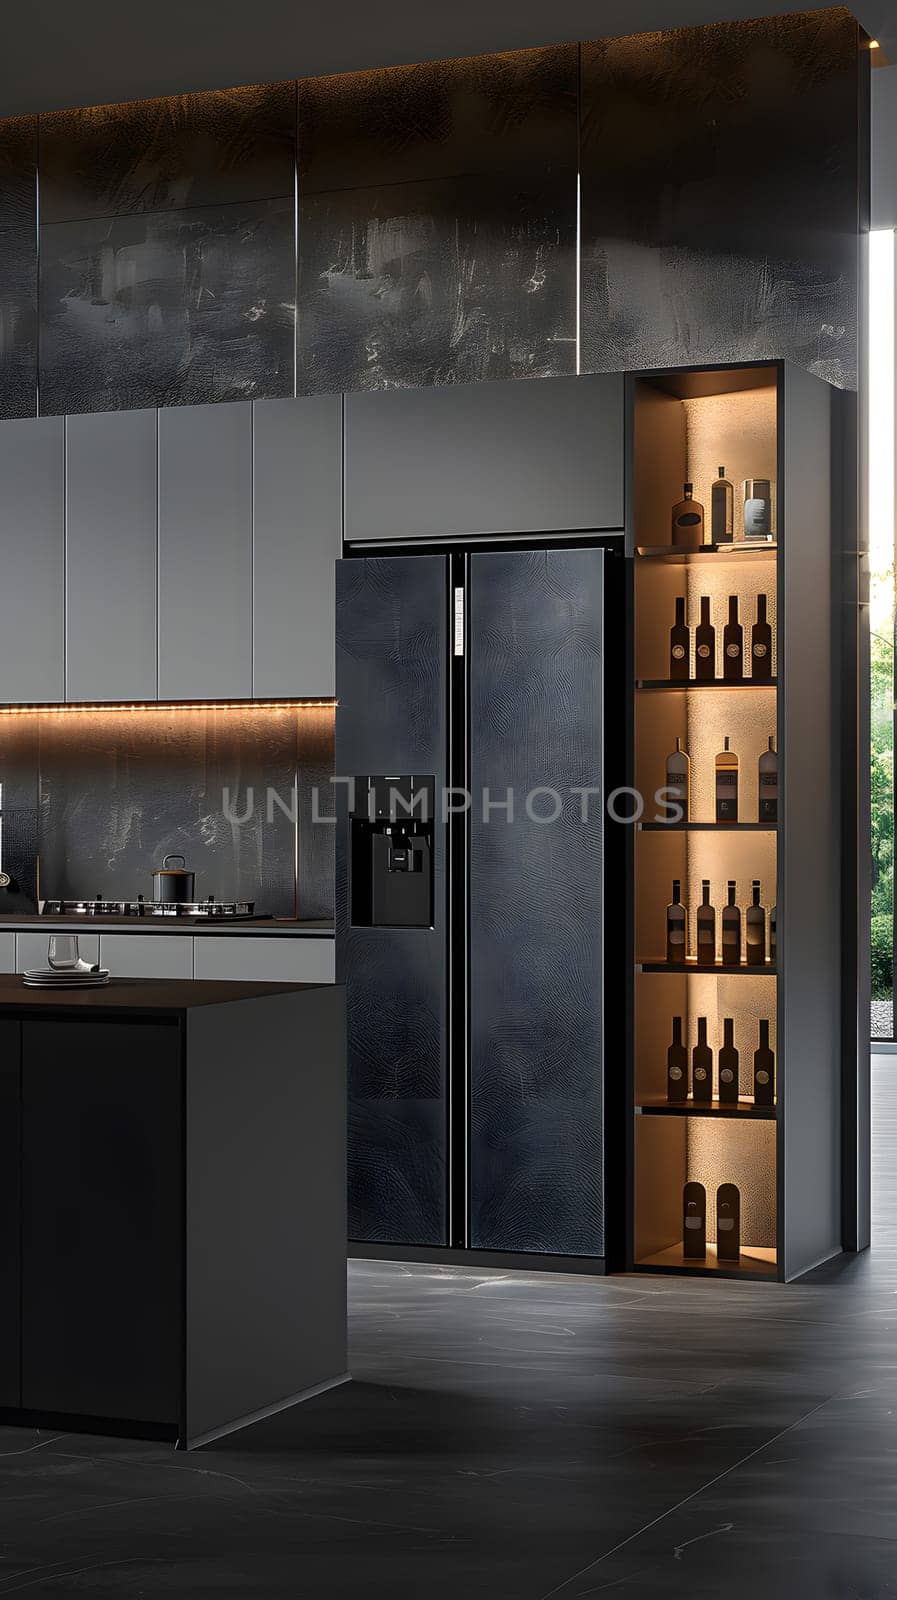 A kitchen with a black fridge and shelves full of bottles by Nadtochiy